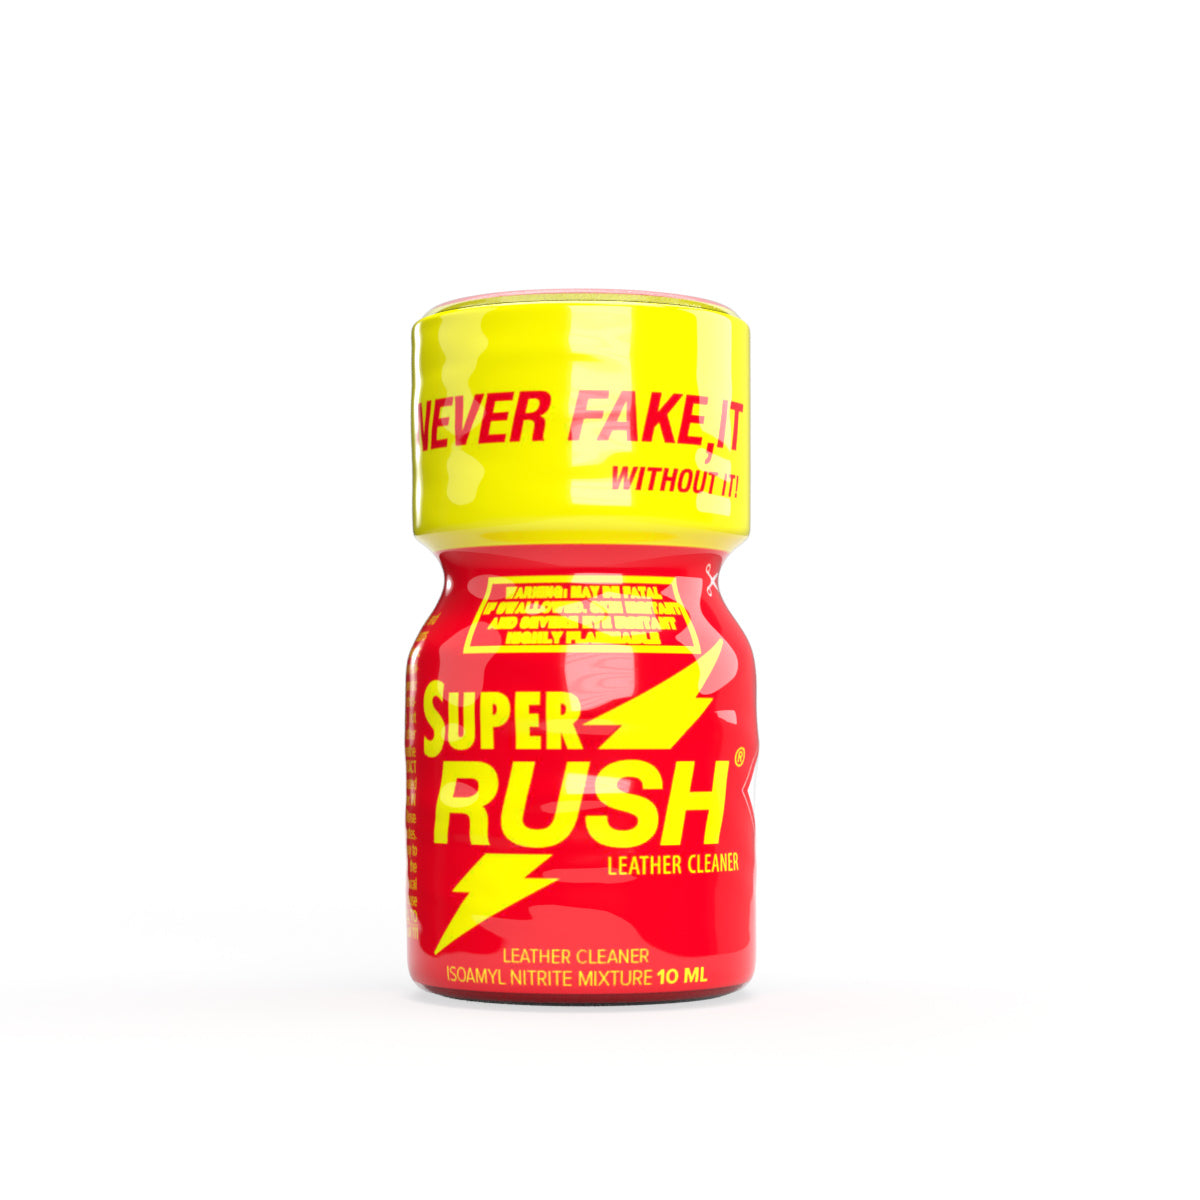 Super Rush Poppers in a 10ml bottle.